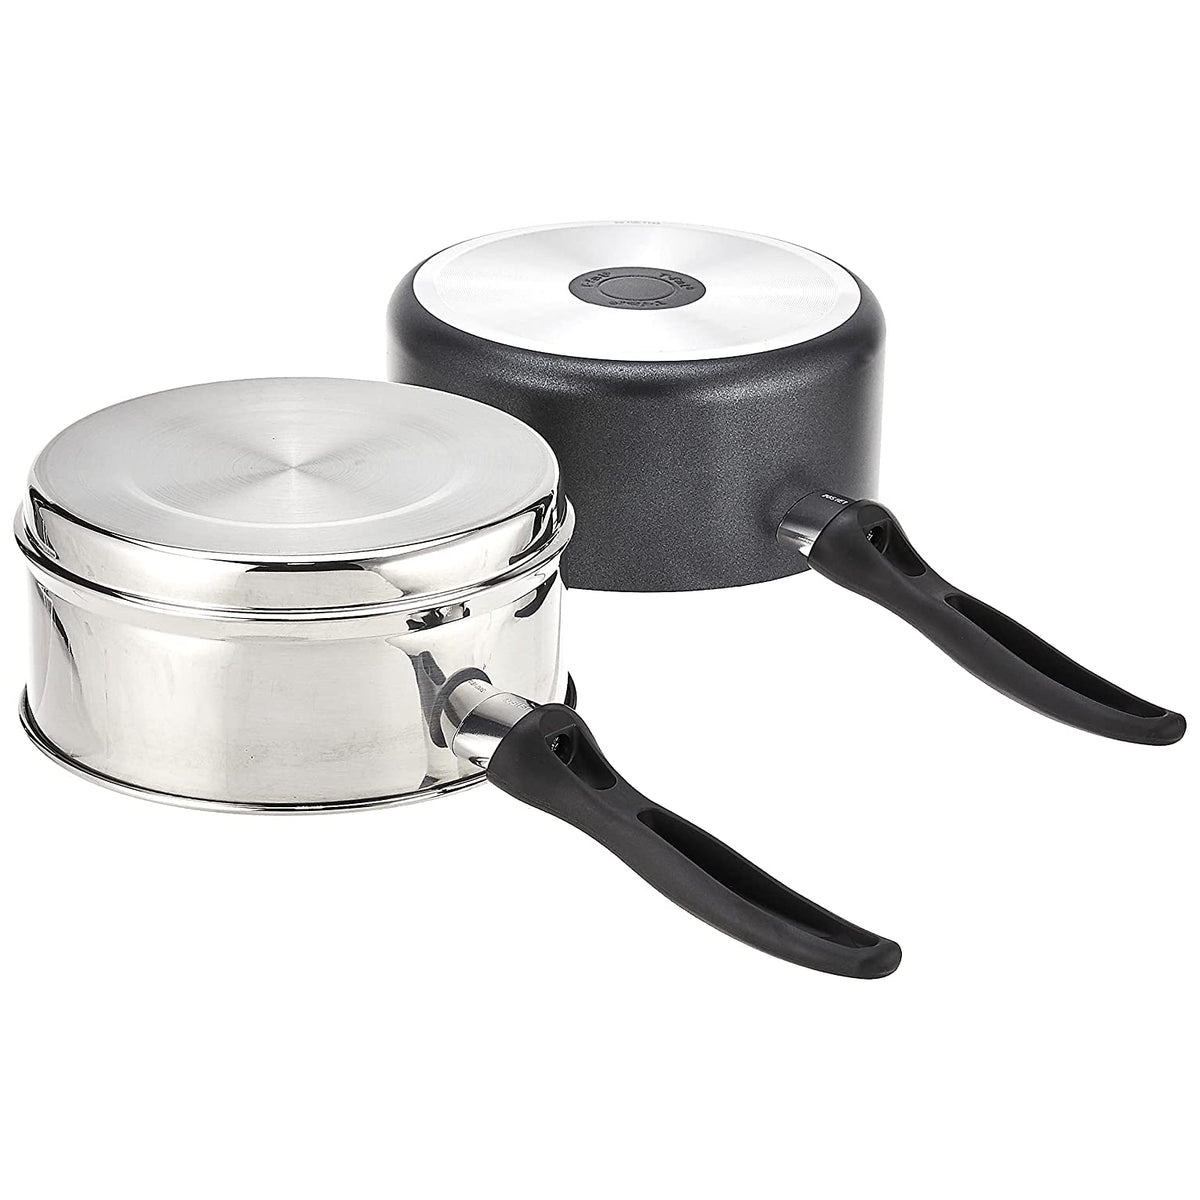 T-fal B363S284 Specialty Stainless Steel Double Boiler Sauce Pan, 3-Quart